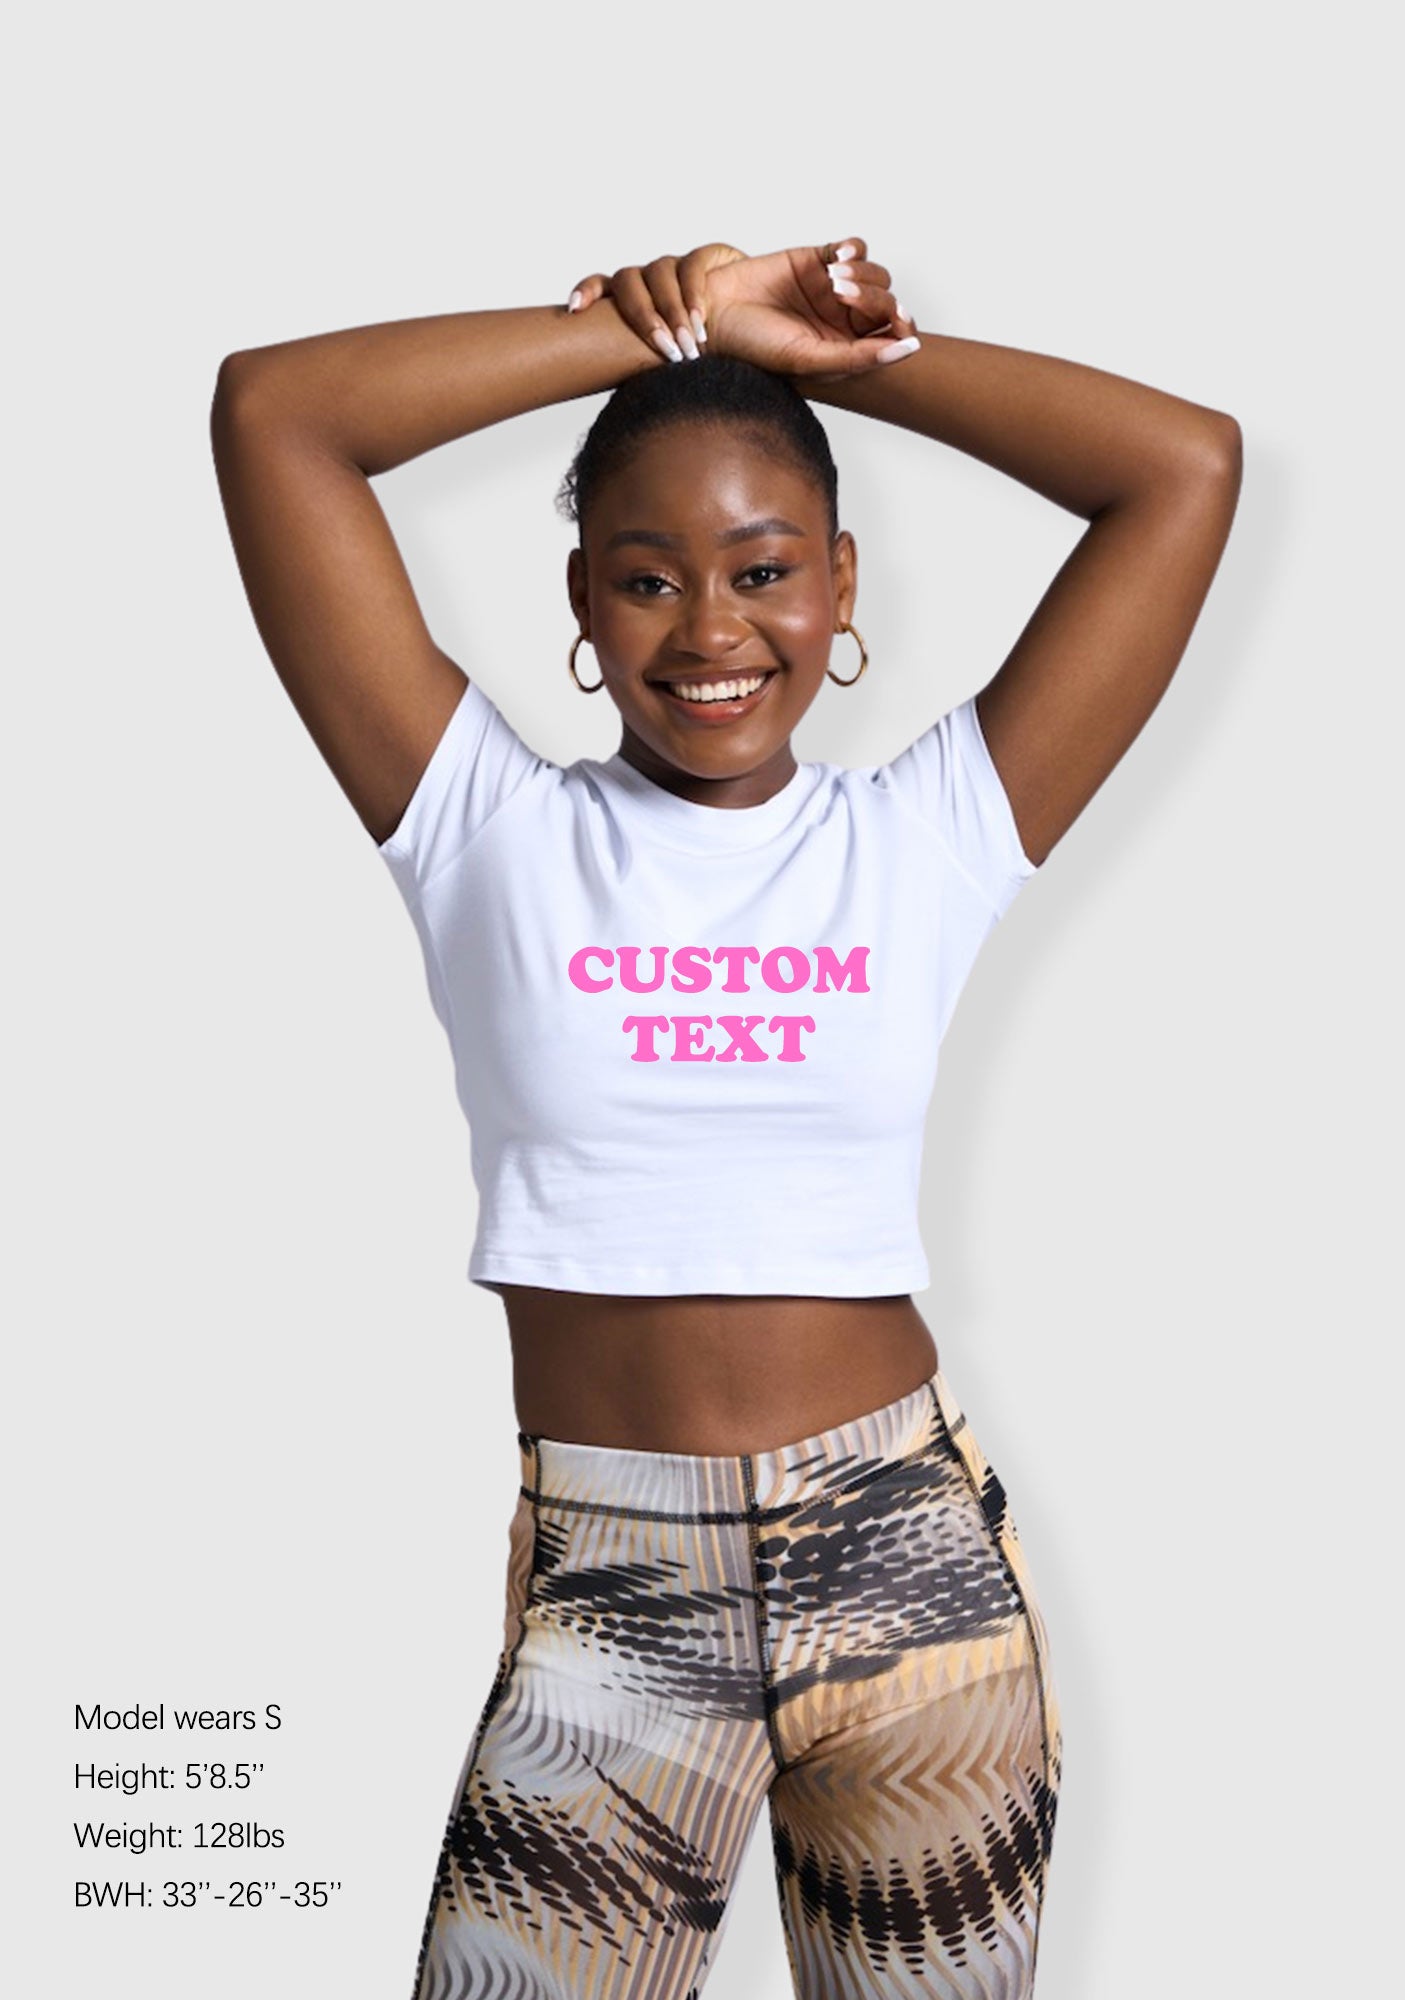 Custom Personalized Text Y2K Baby Tee